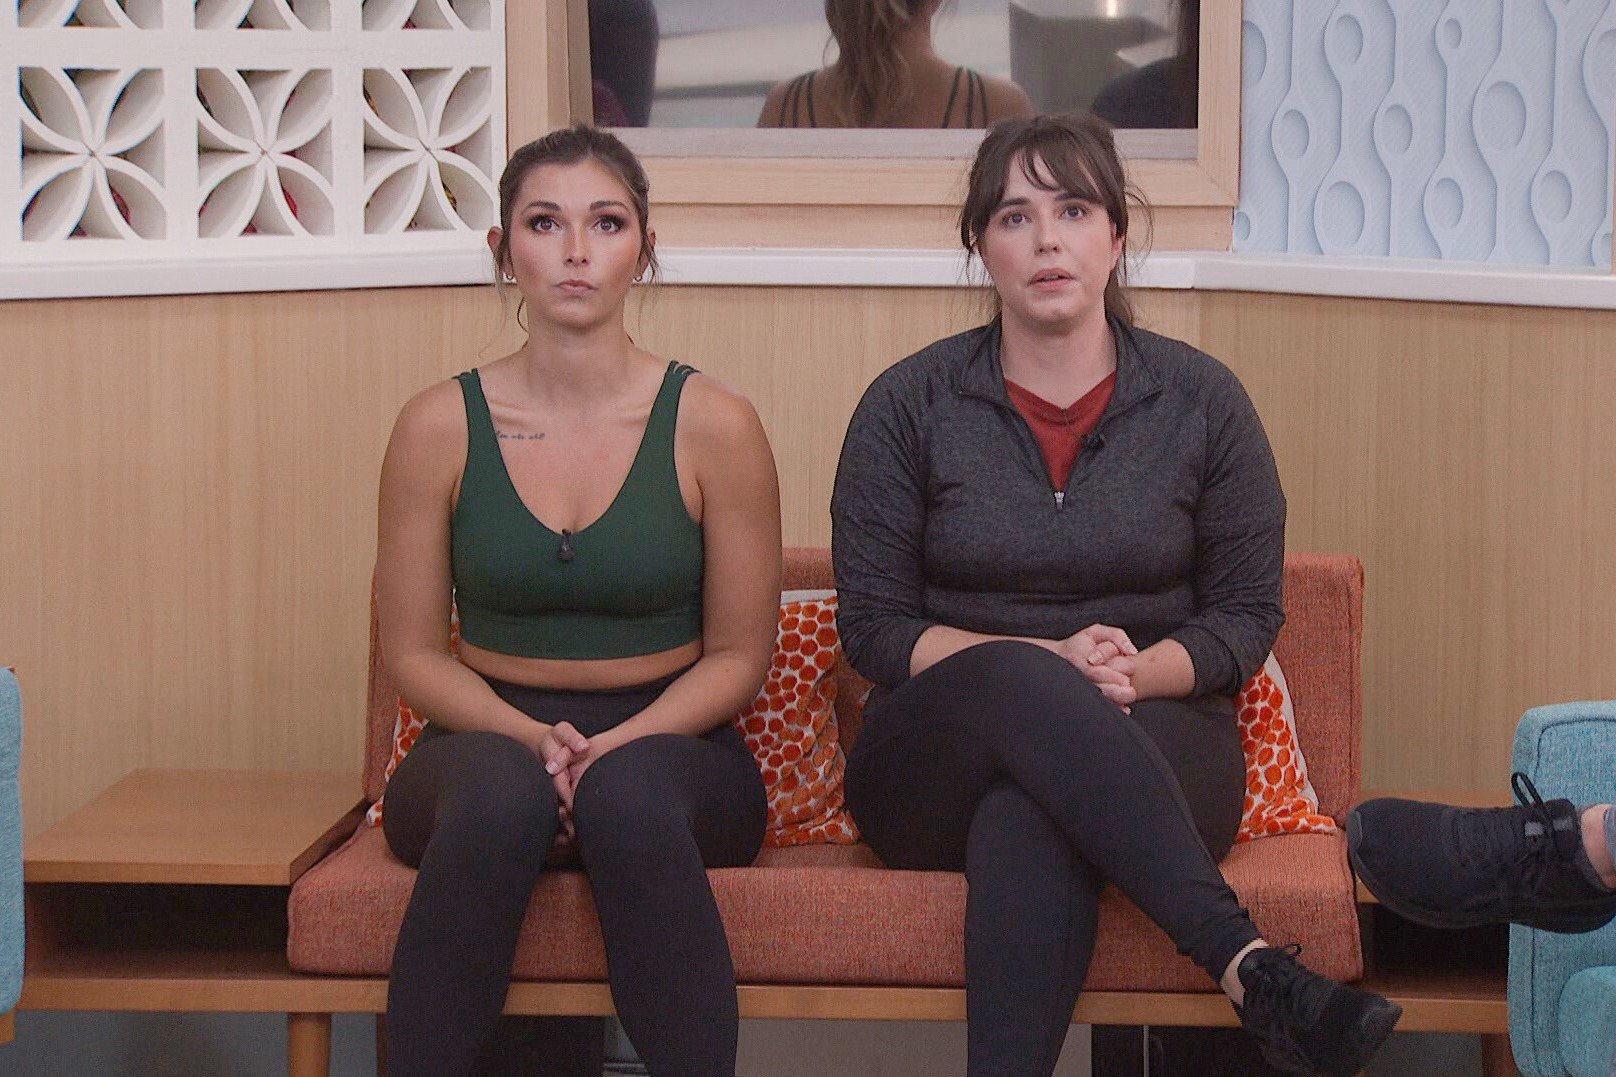 Alyssa Snider and Brittany Hoopes, who, per 'Big Brother 24' spoilers are now working together, sit in the nomination chairs. Alyssa wears a dark green sports bra and black leggings. Brittany wears a dark gray long-sleeved shirt over a red shirt and black leggings.